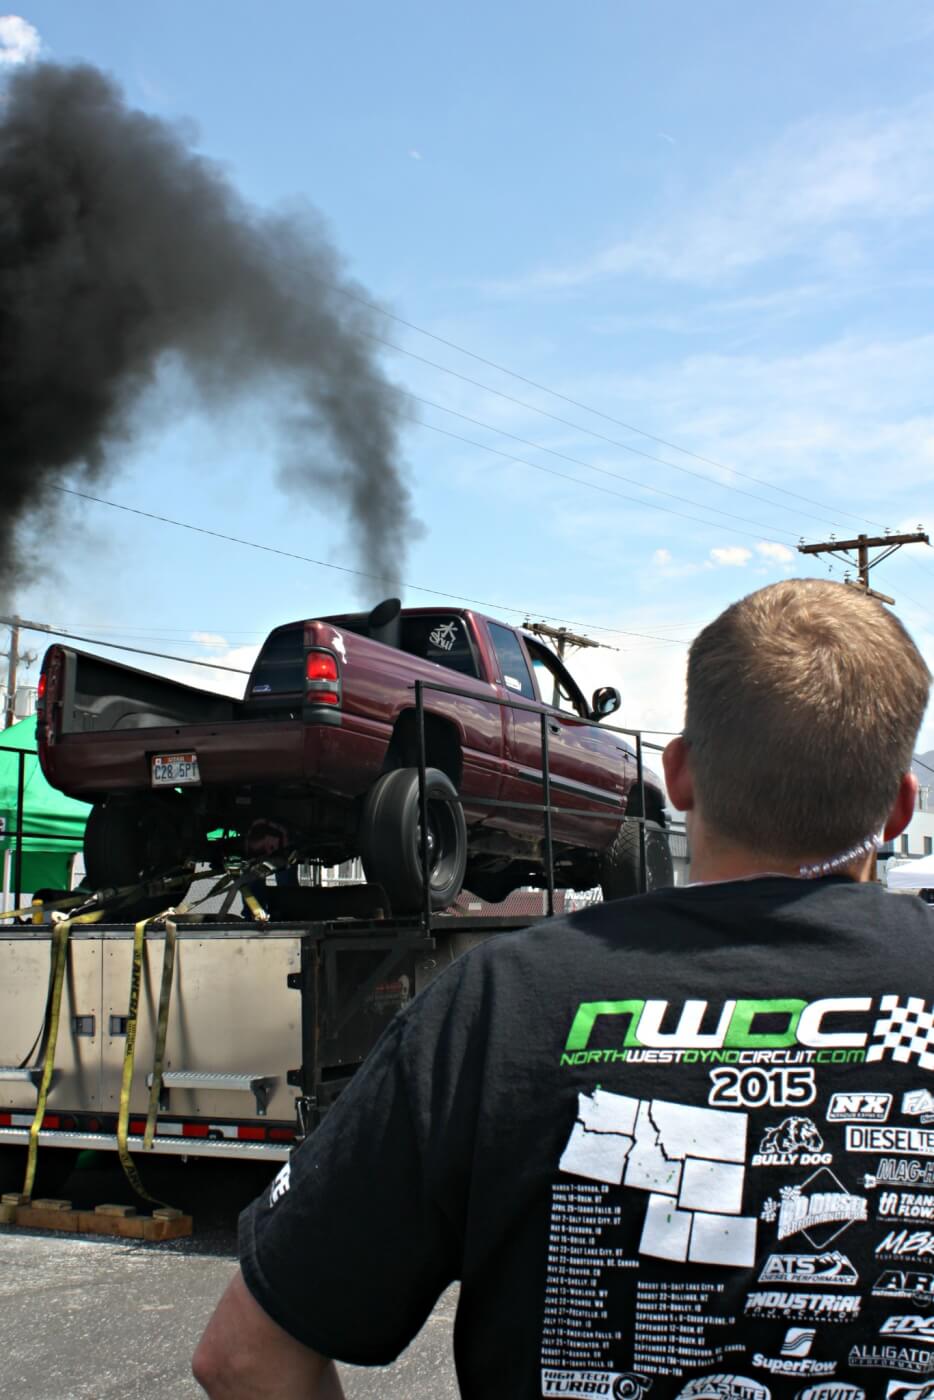 As just the fourth stop of twenty-five in Northwest Dyno Circuit’s 2015 schedule, the Industrial Injection event is always one to bring out a crowd. With over 80 trucks dynoed on the day, good food, good friends and big horsepower numbers kept smiles on everyone’s face…look for an NWDC event coming up near you.